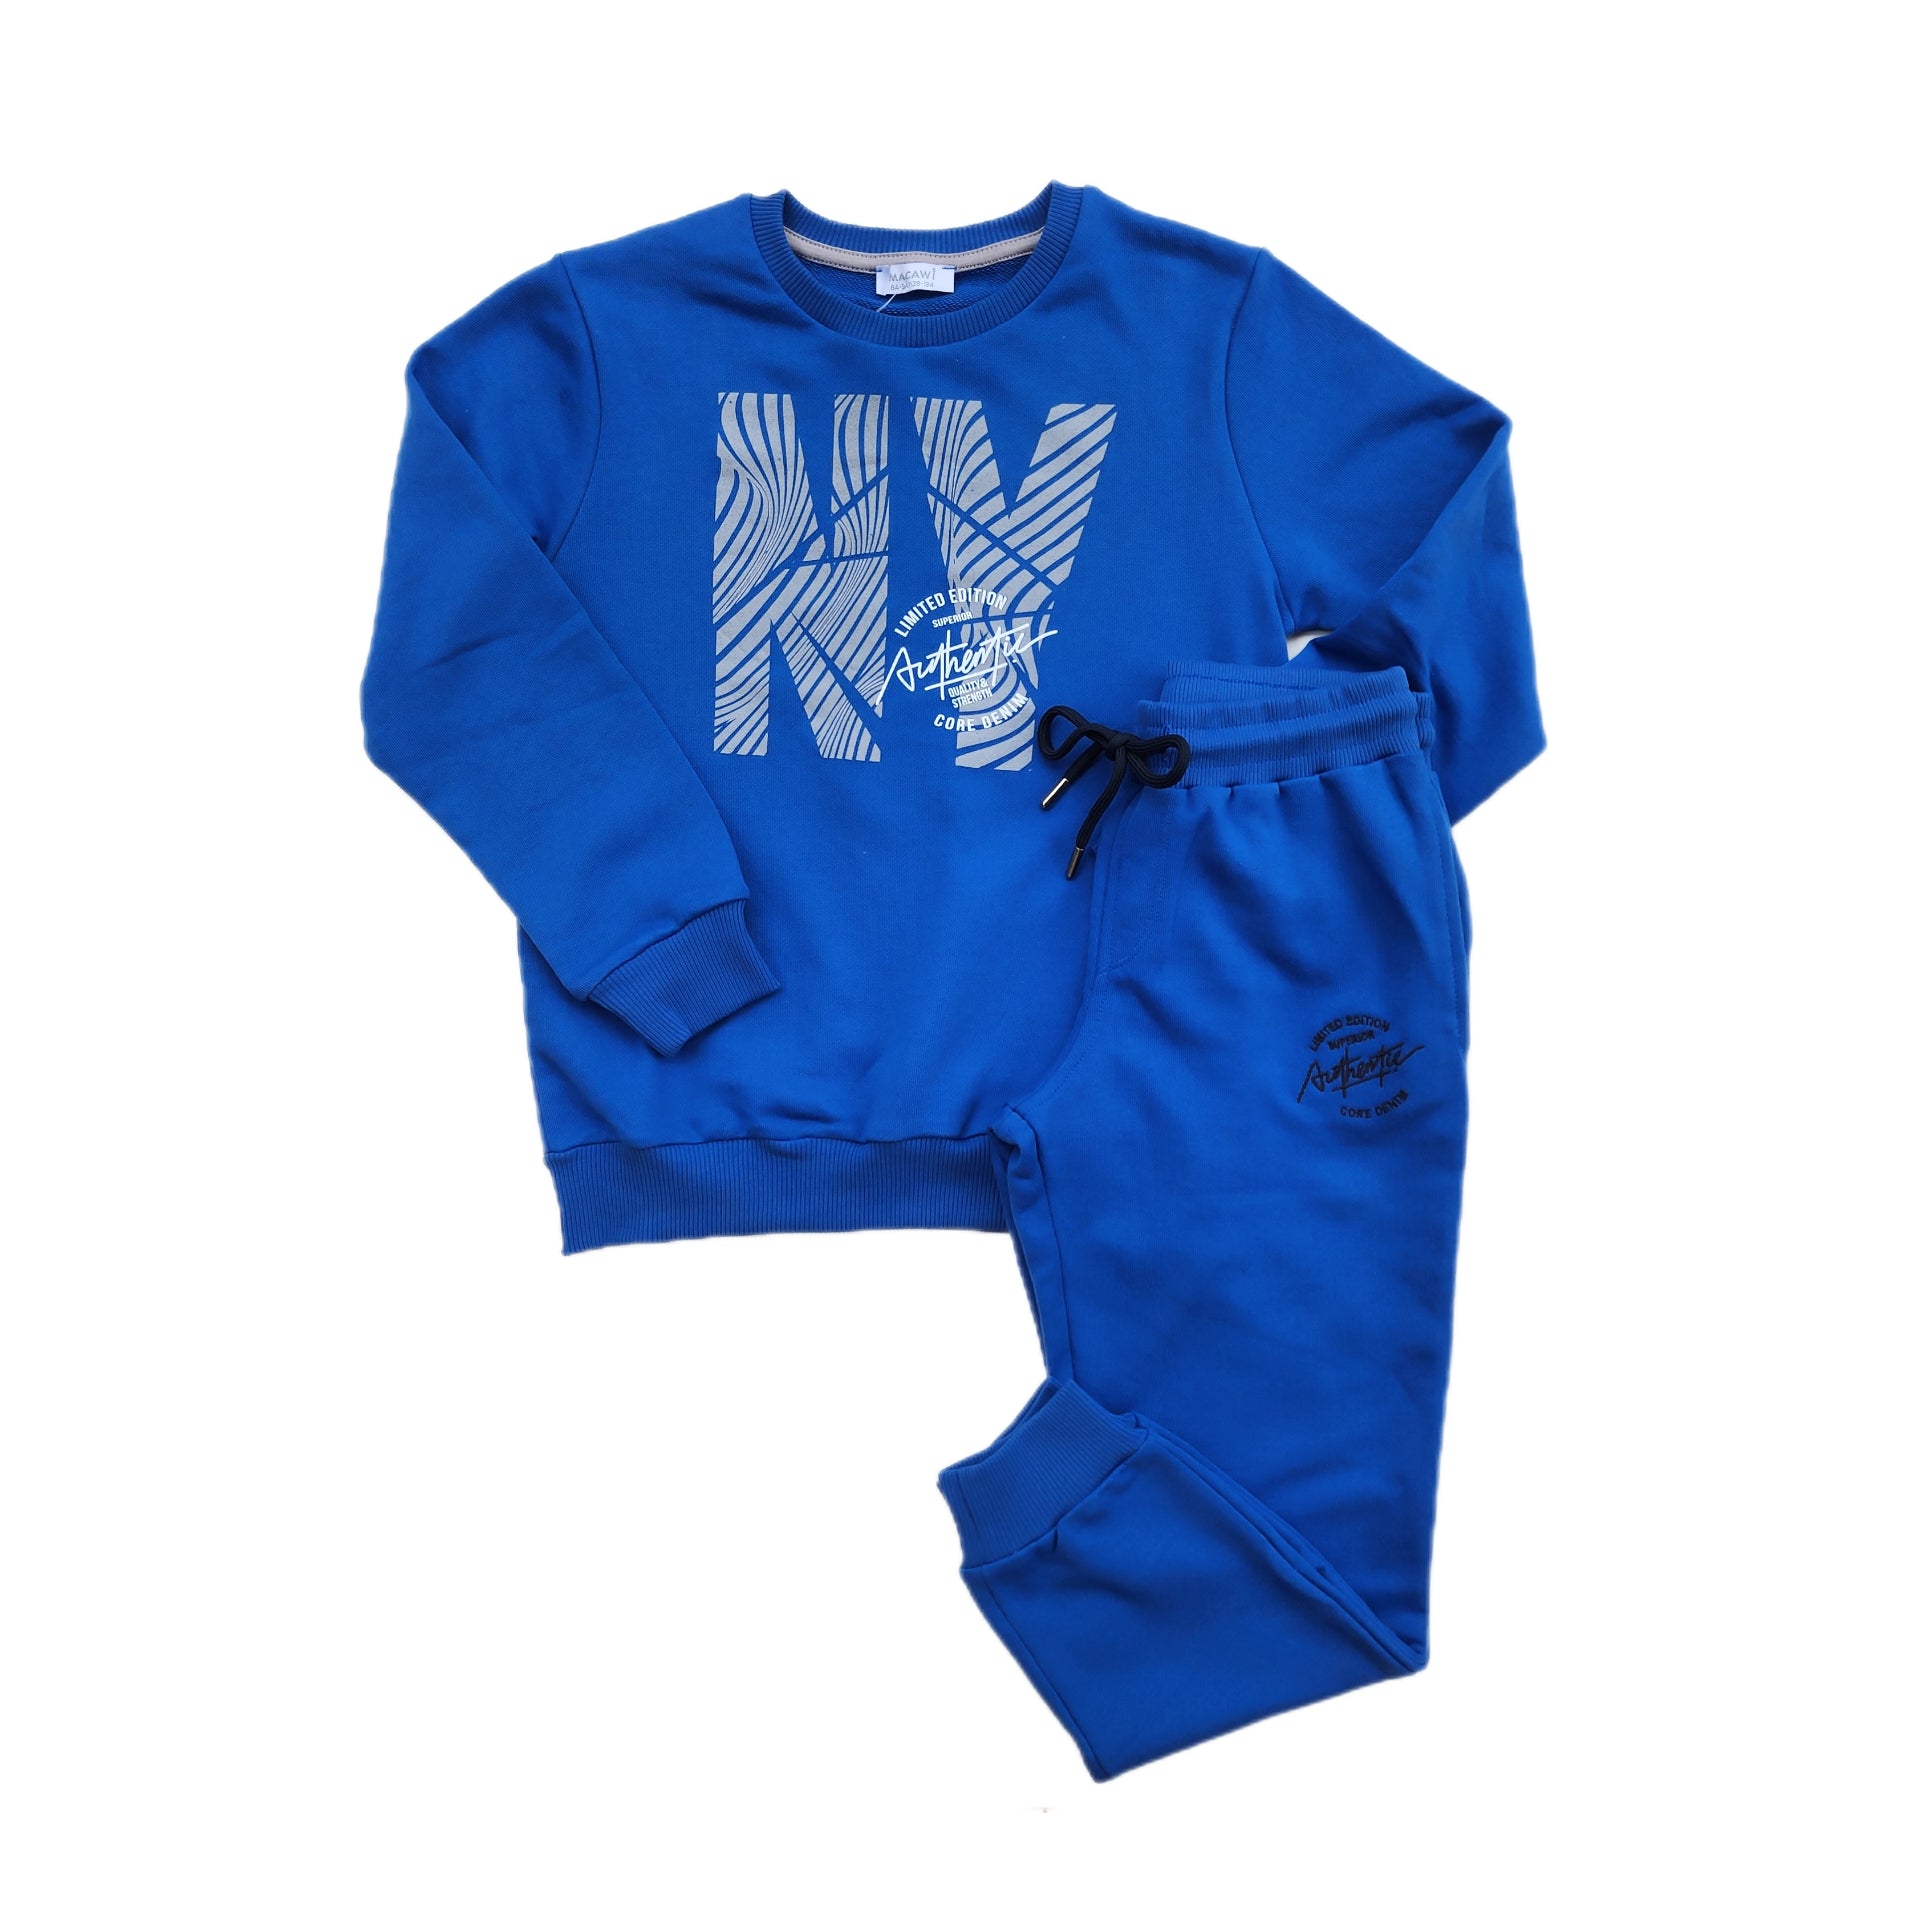 6-15 Years Authentic Boys Tracksuit (Black/Blue/Gray) - 6-15 Years Authentic Boys Tracksuit (Black/Blue/Gray) - Royal Blue / 6-7 Years - Macawi - Melymod